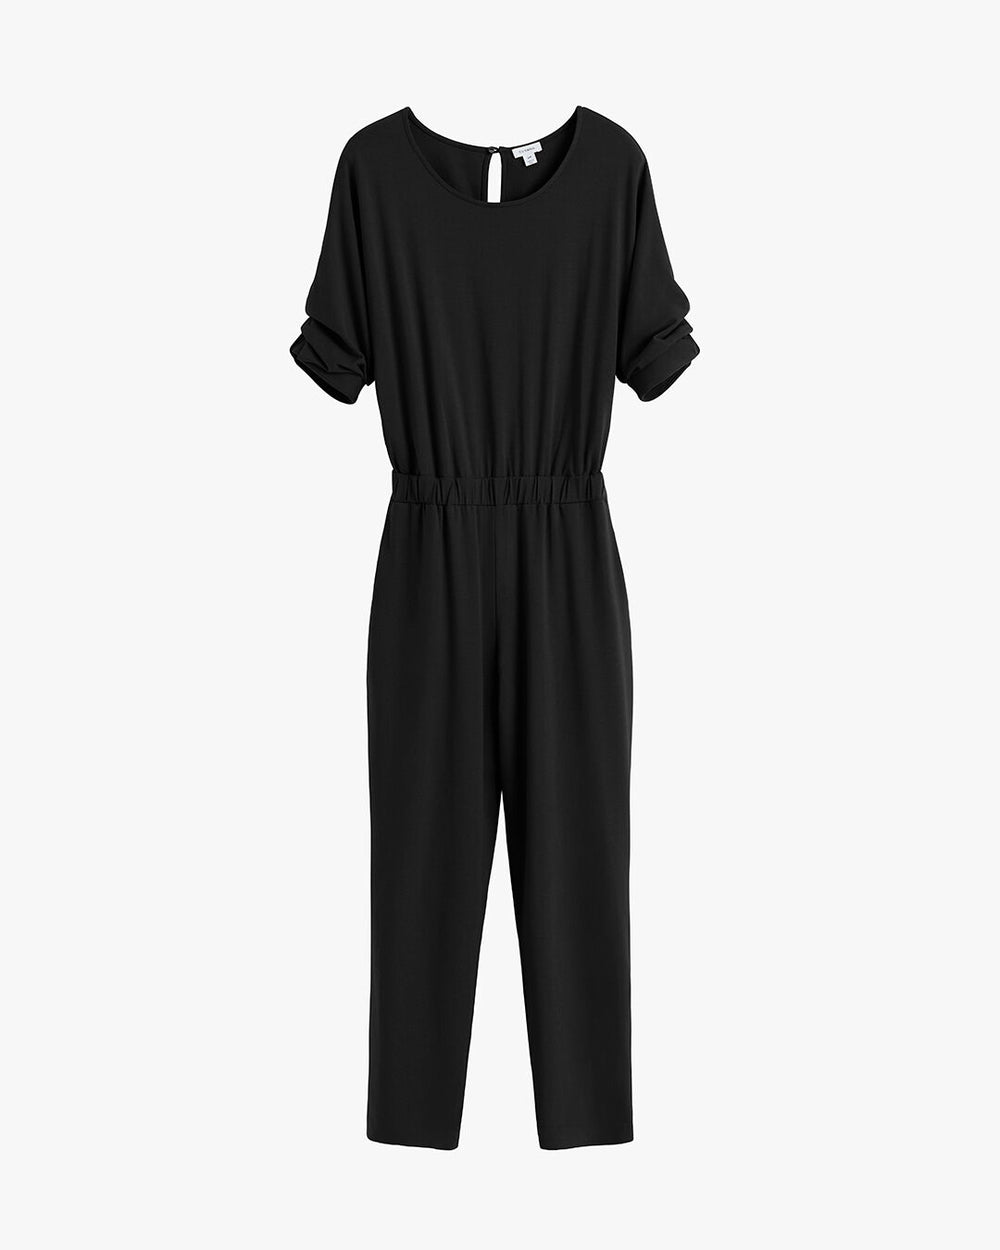 Black jumpsuit with short sleeves and elastic waistband displayed on a plain background.